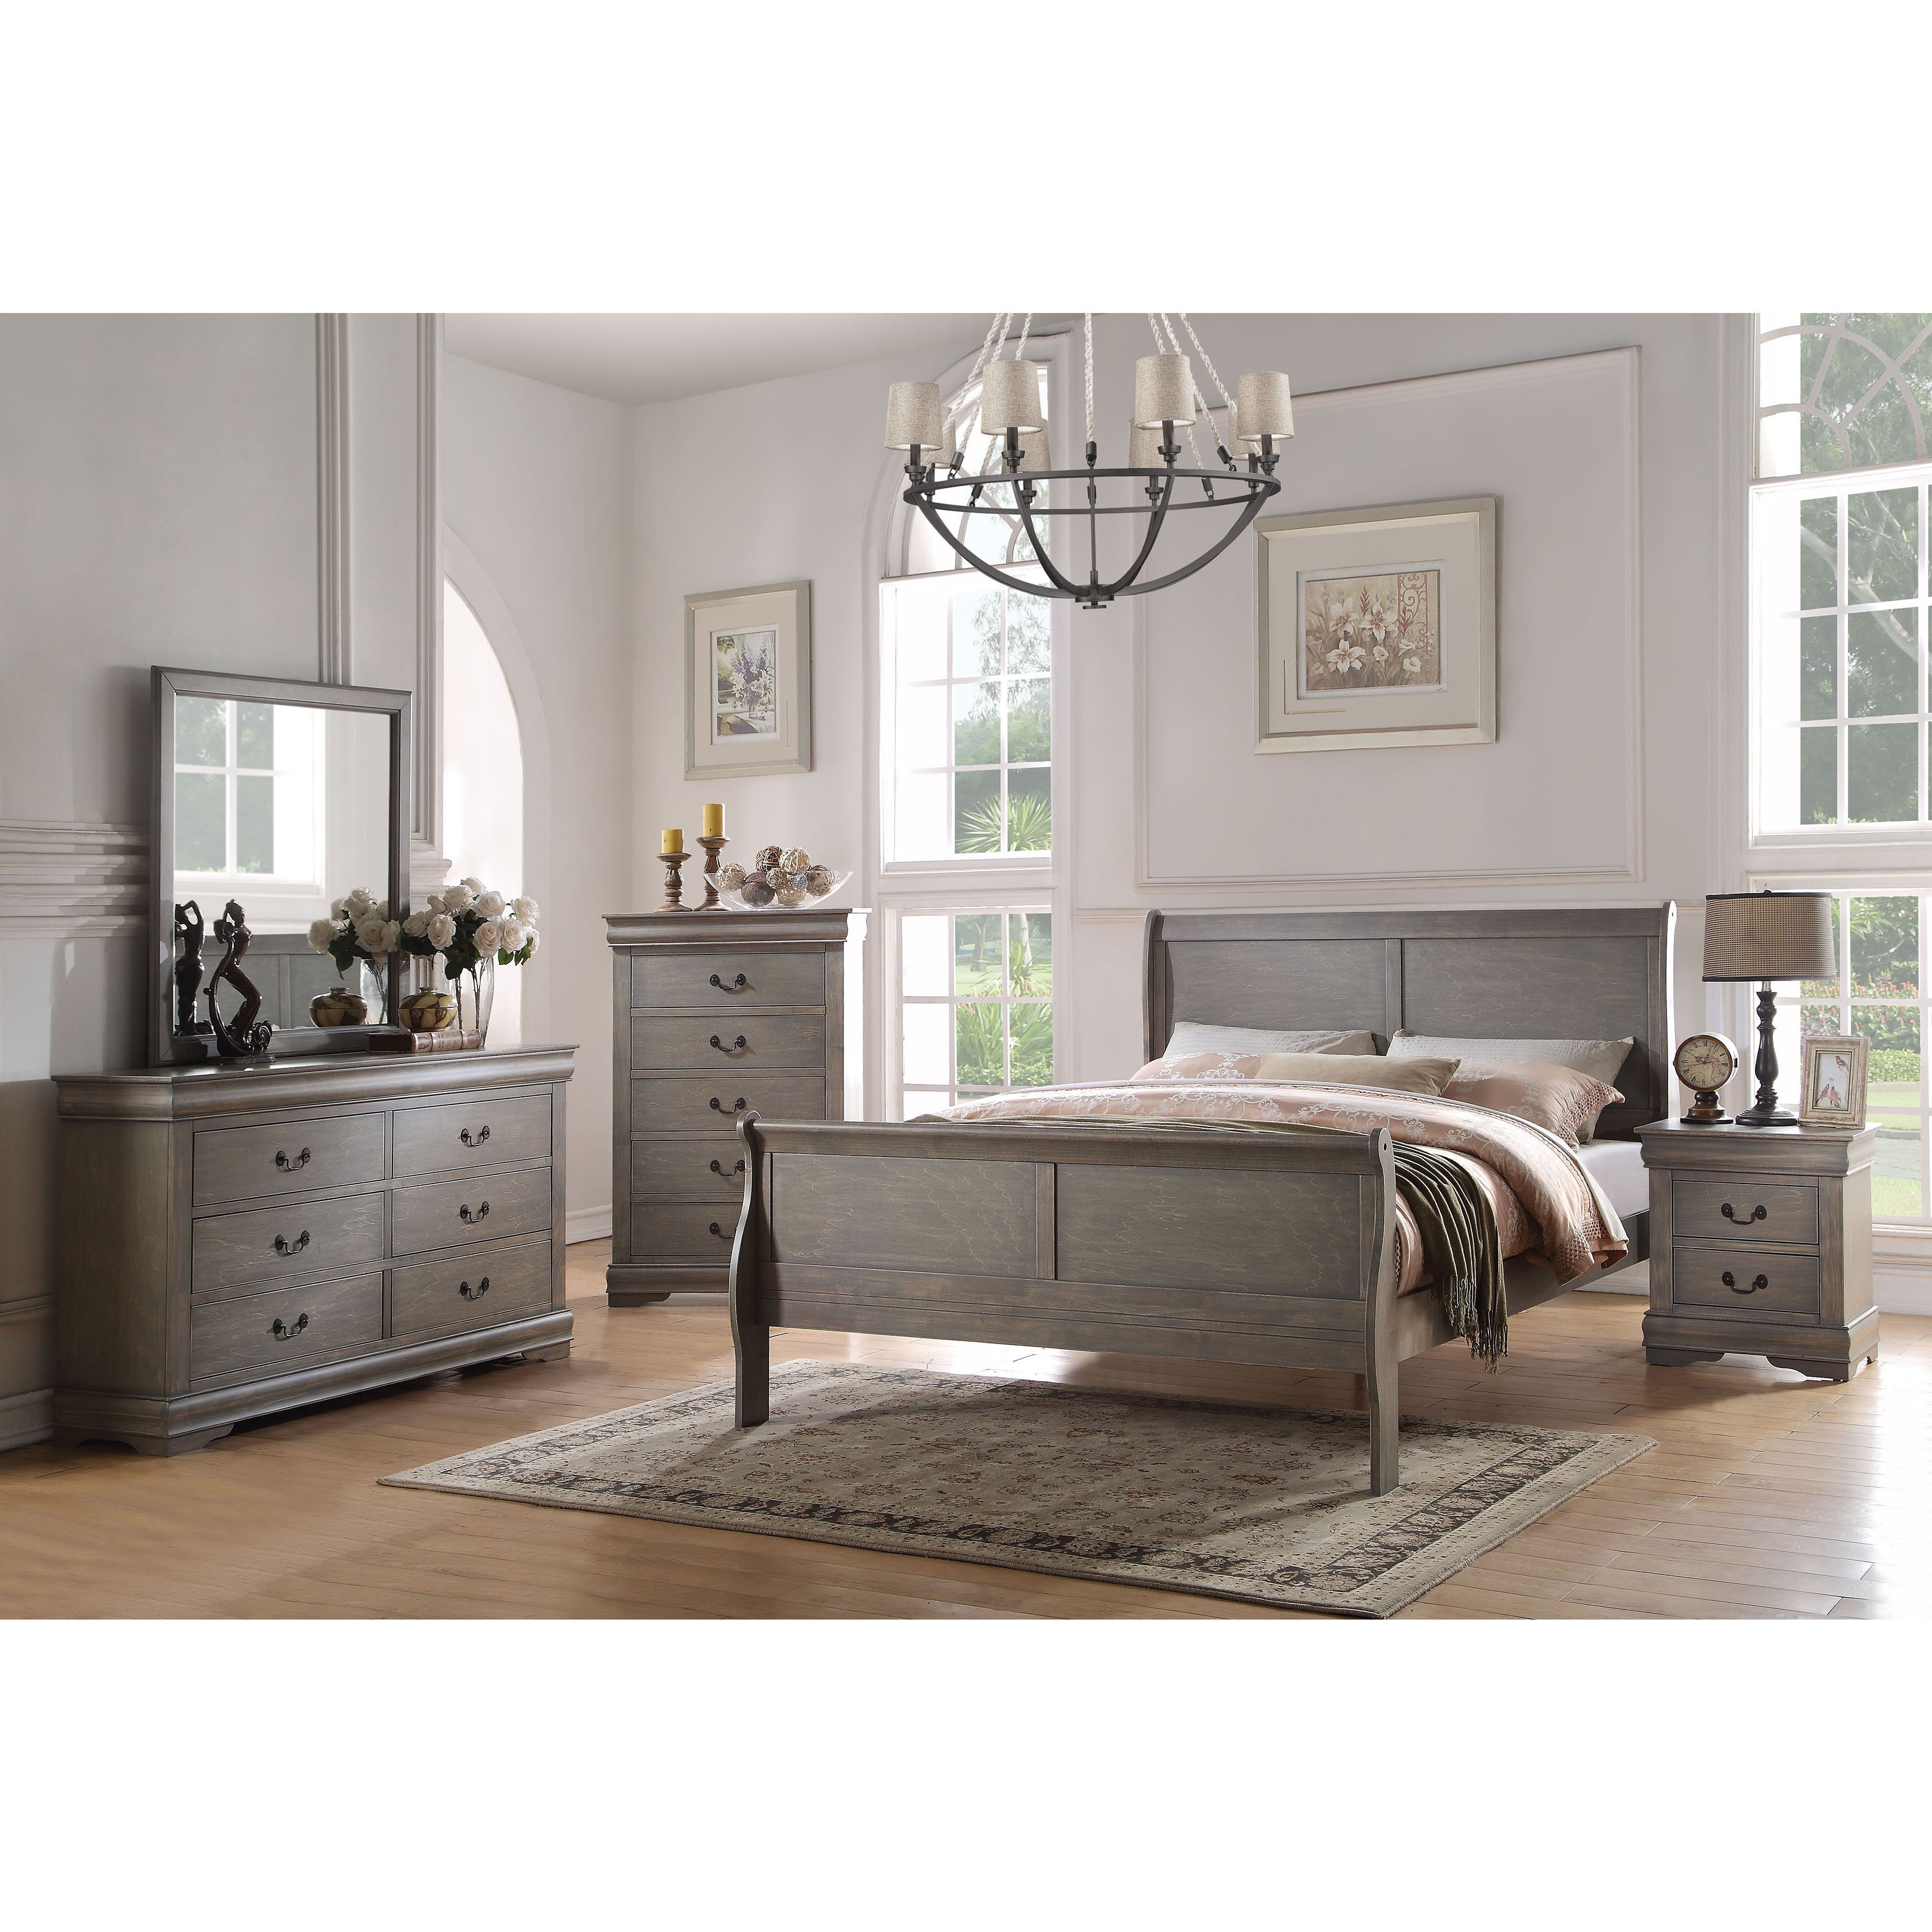 Acme Furniture Louis Philippe 4 Piece Bedroom Set Antique Gray for size 3500 X 3500